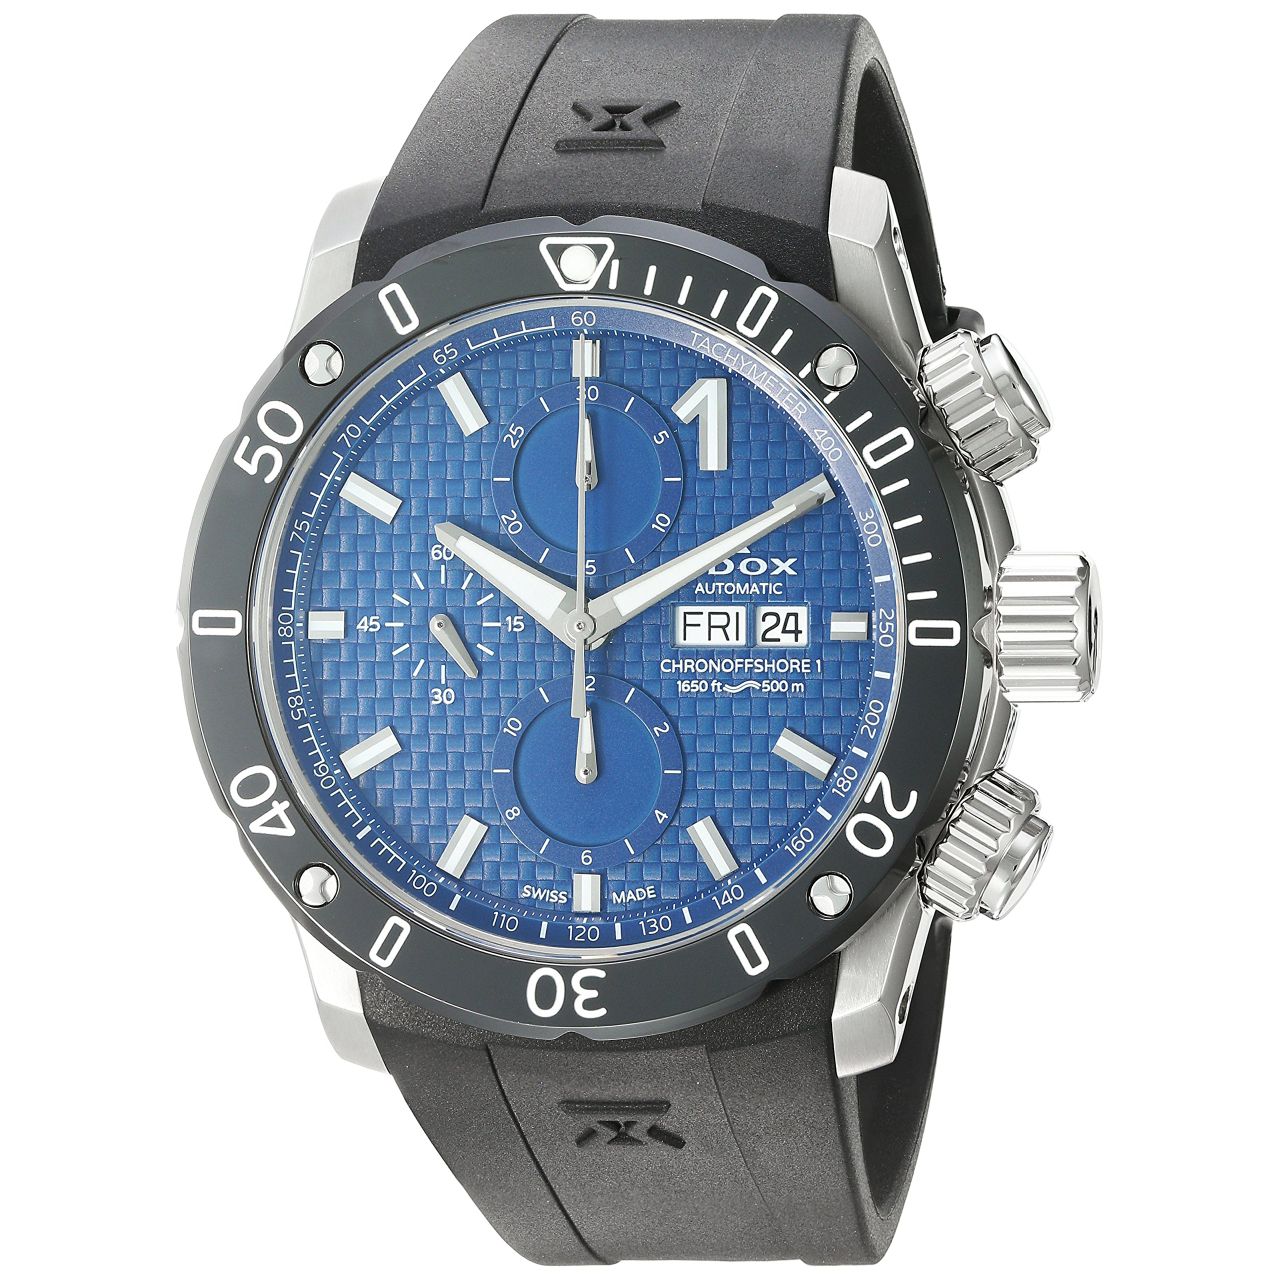 Edox Men's 'Chronoffshore-1' Swiss Automatic Stainless Steel and Rubber Diving W